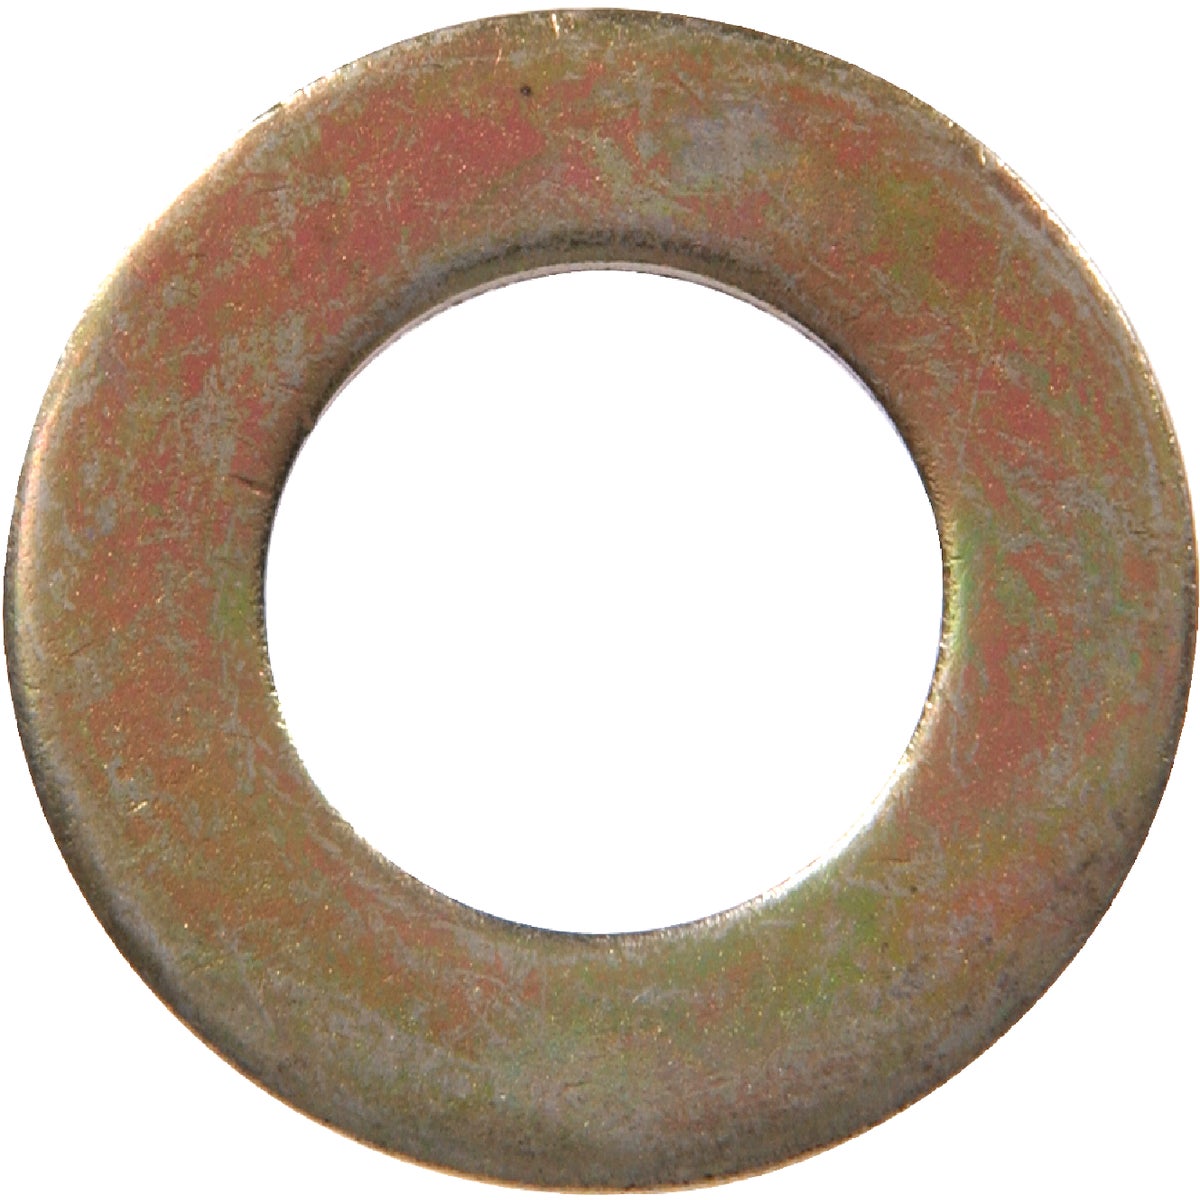 Item 743070, Hardened, yellow dichromate flat washer is used to spread the load of a 